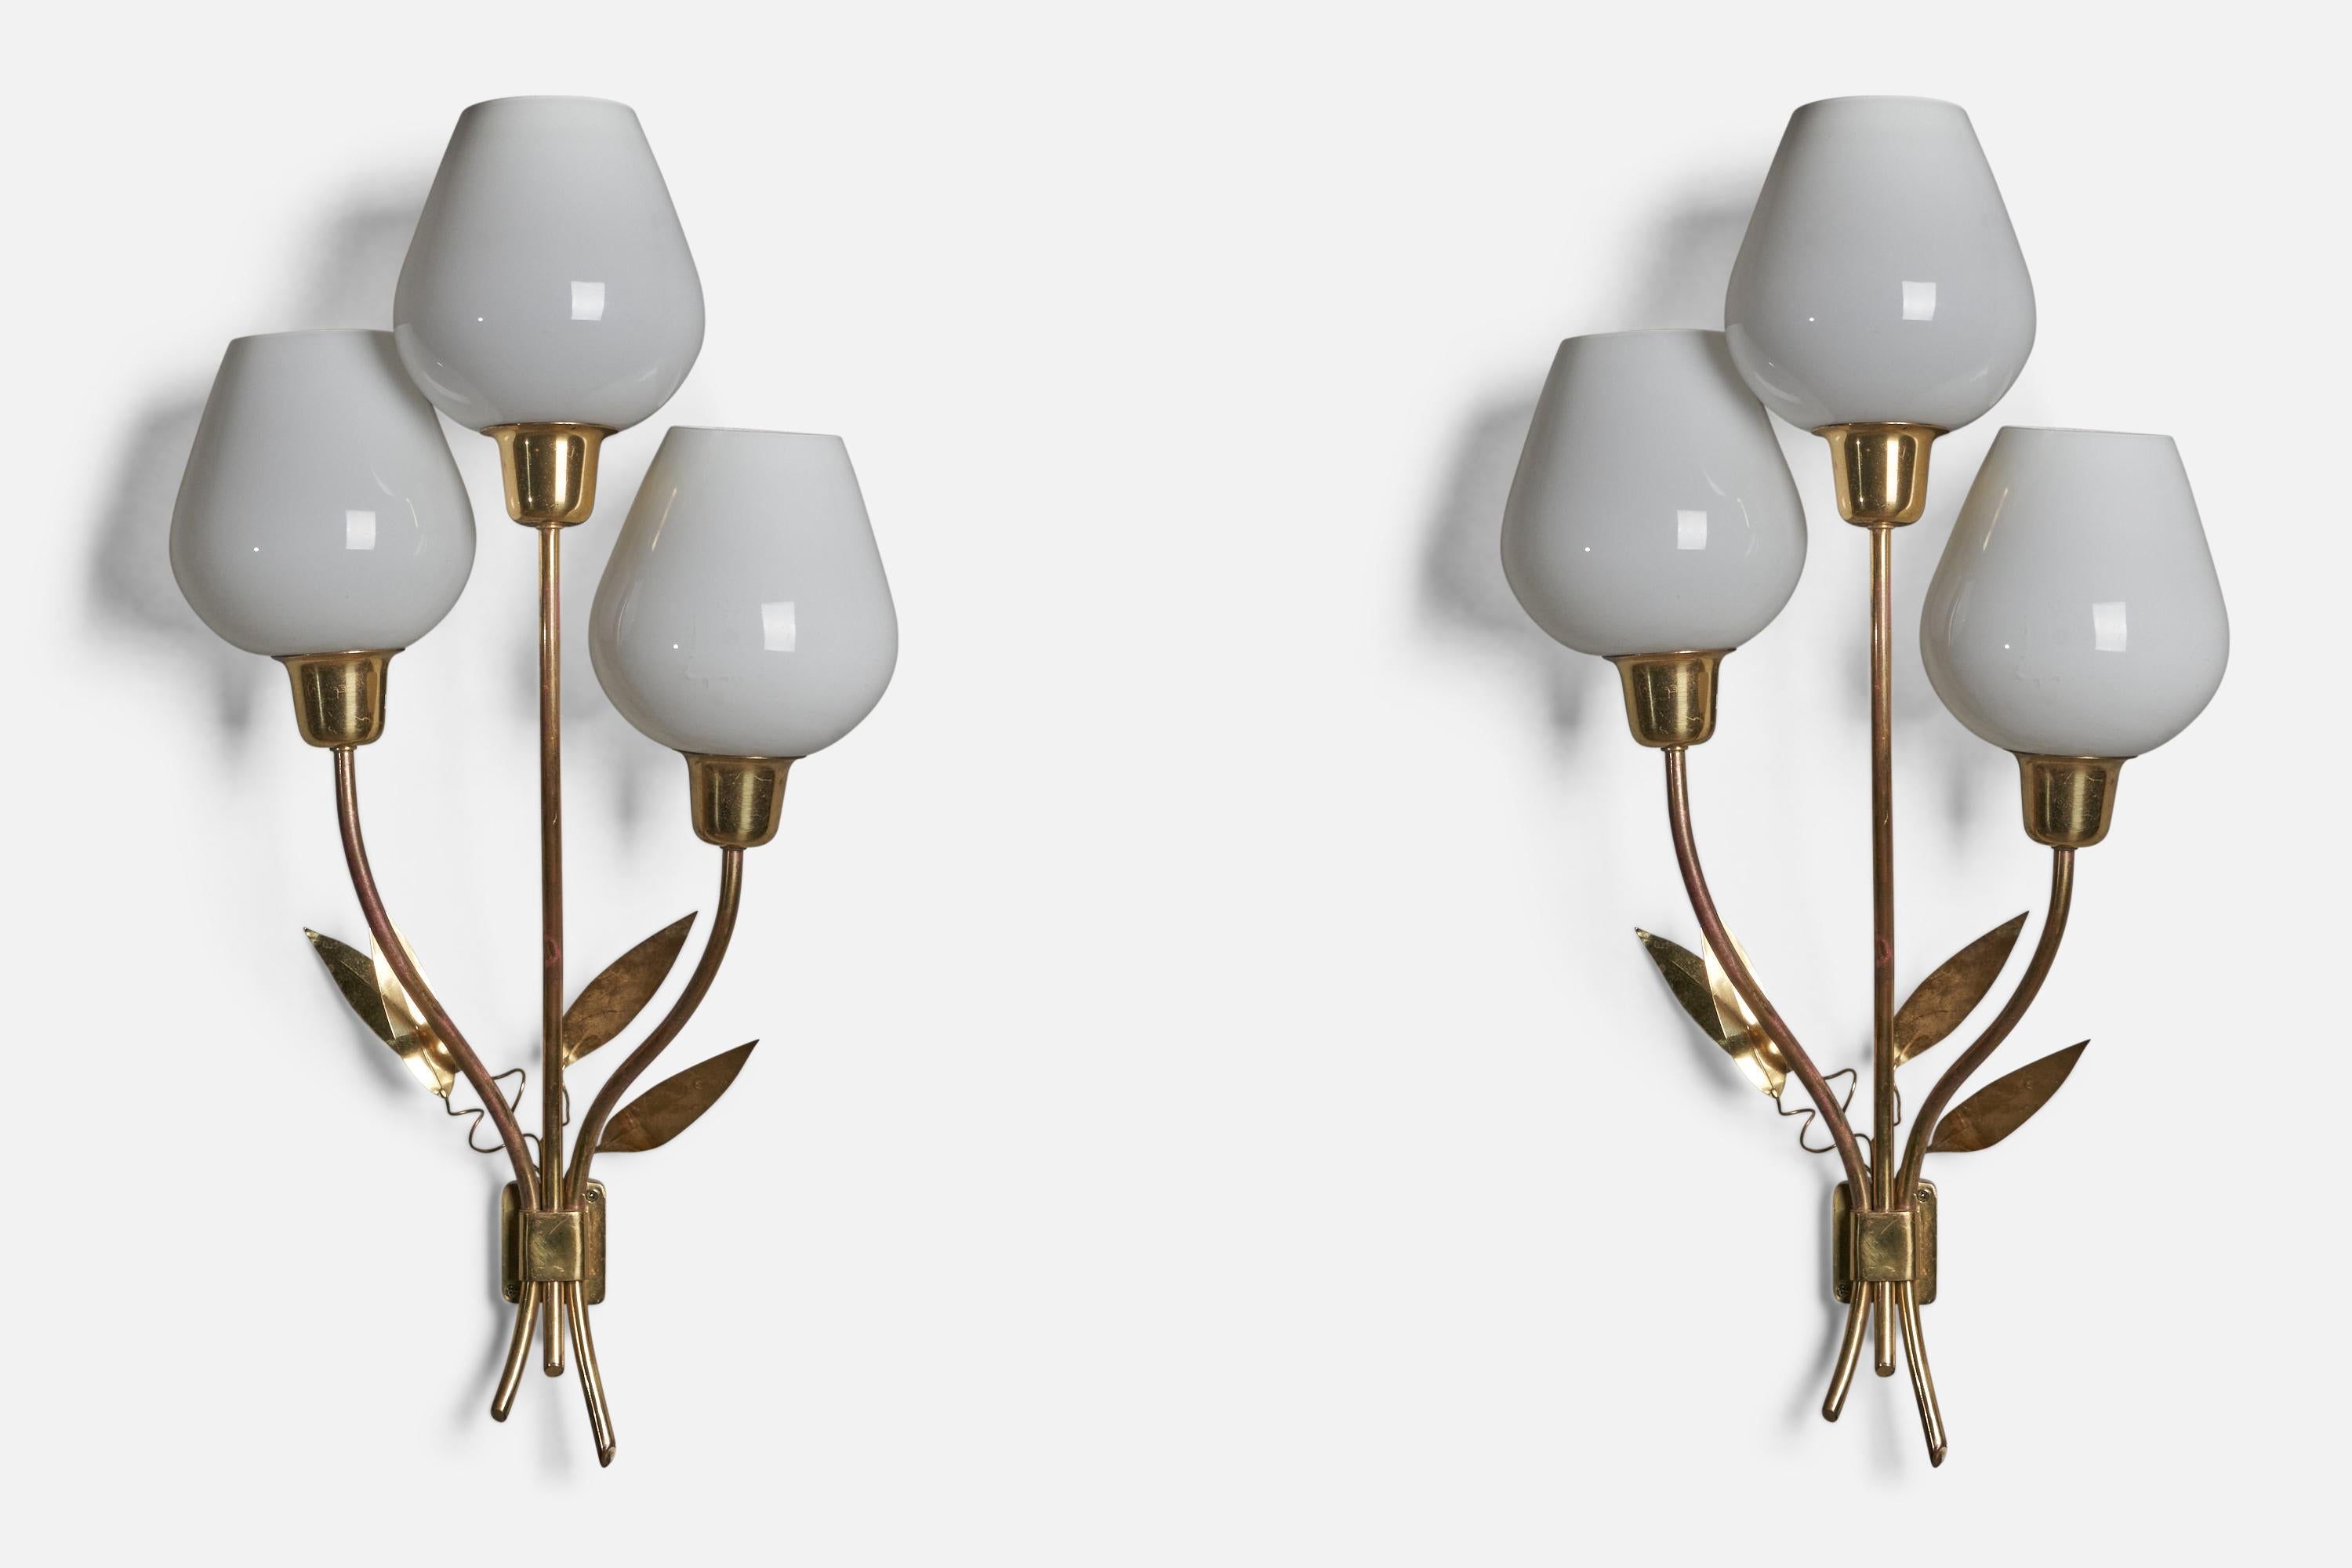 A pair of three-armed brass and white opaline glass wall lights, designed and produced in Finland, 1950s.

Overall Dimensions (inches): 25” H x 13” W x 6” D

Bulb Specifications: E-26 Bulb

Number of Sockets: 3